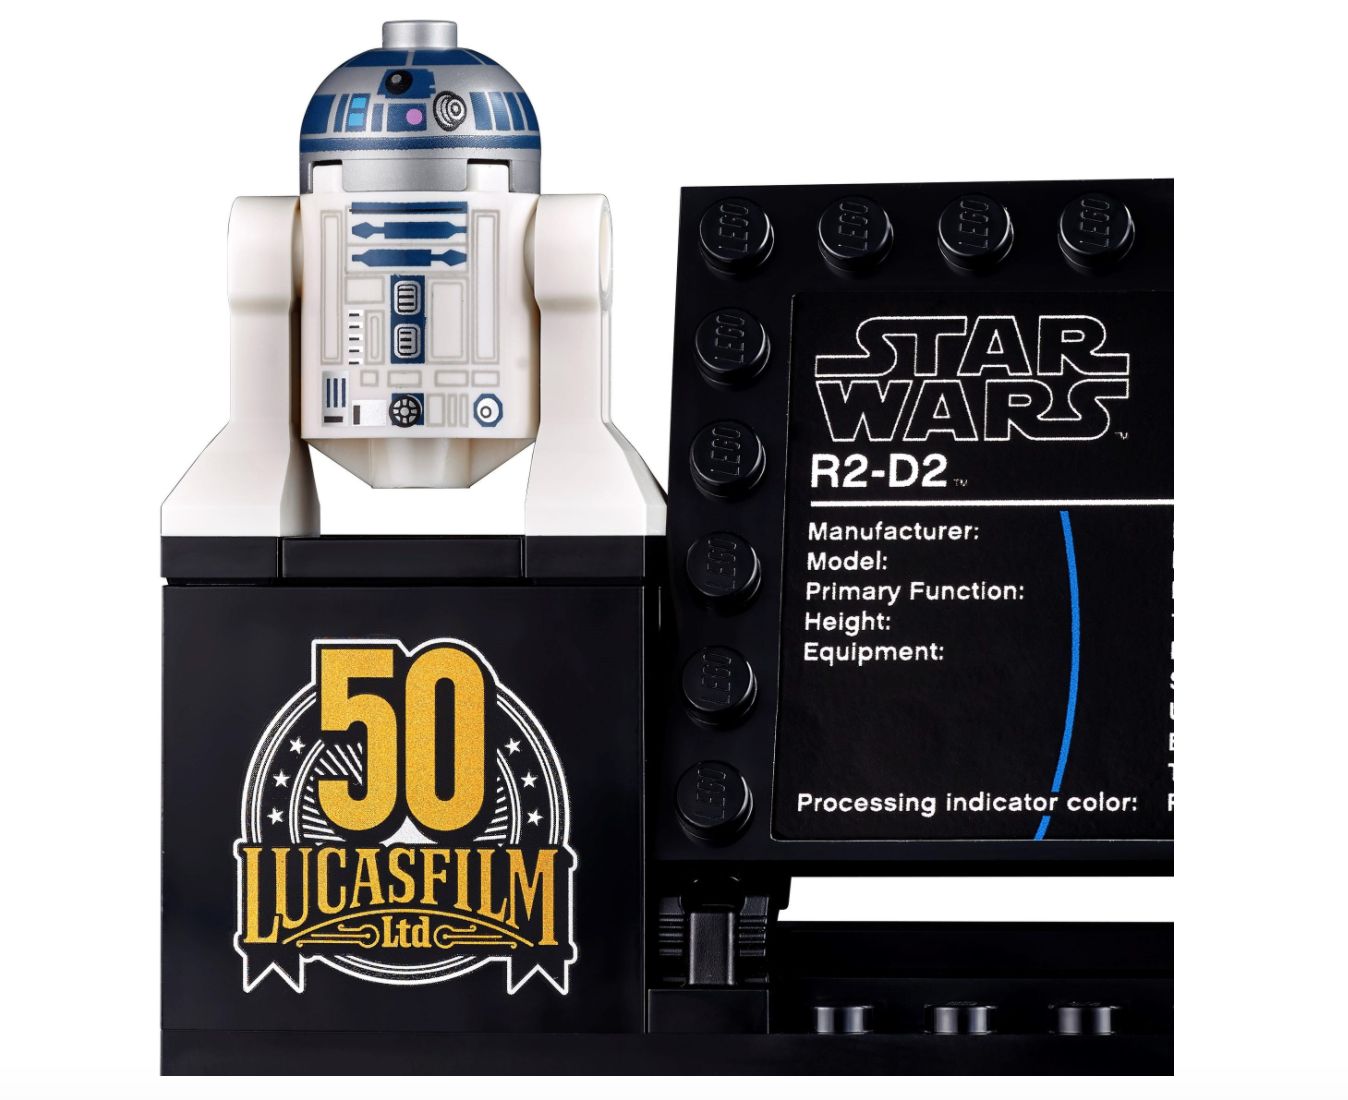 Lego unveils its biggest and best R2-D2 set in time for May the 4th